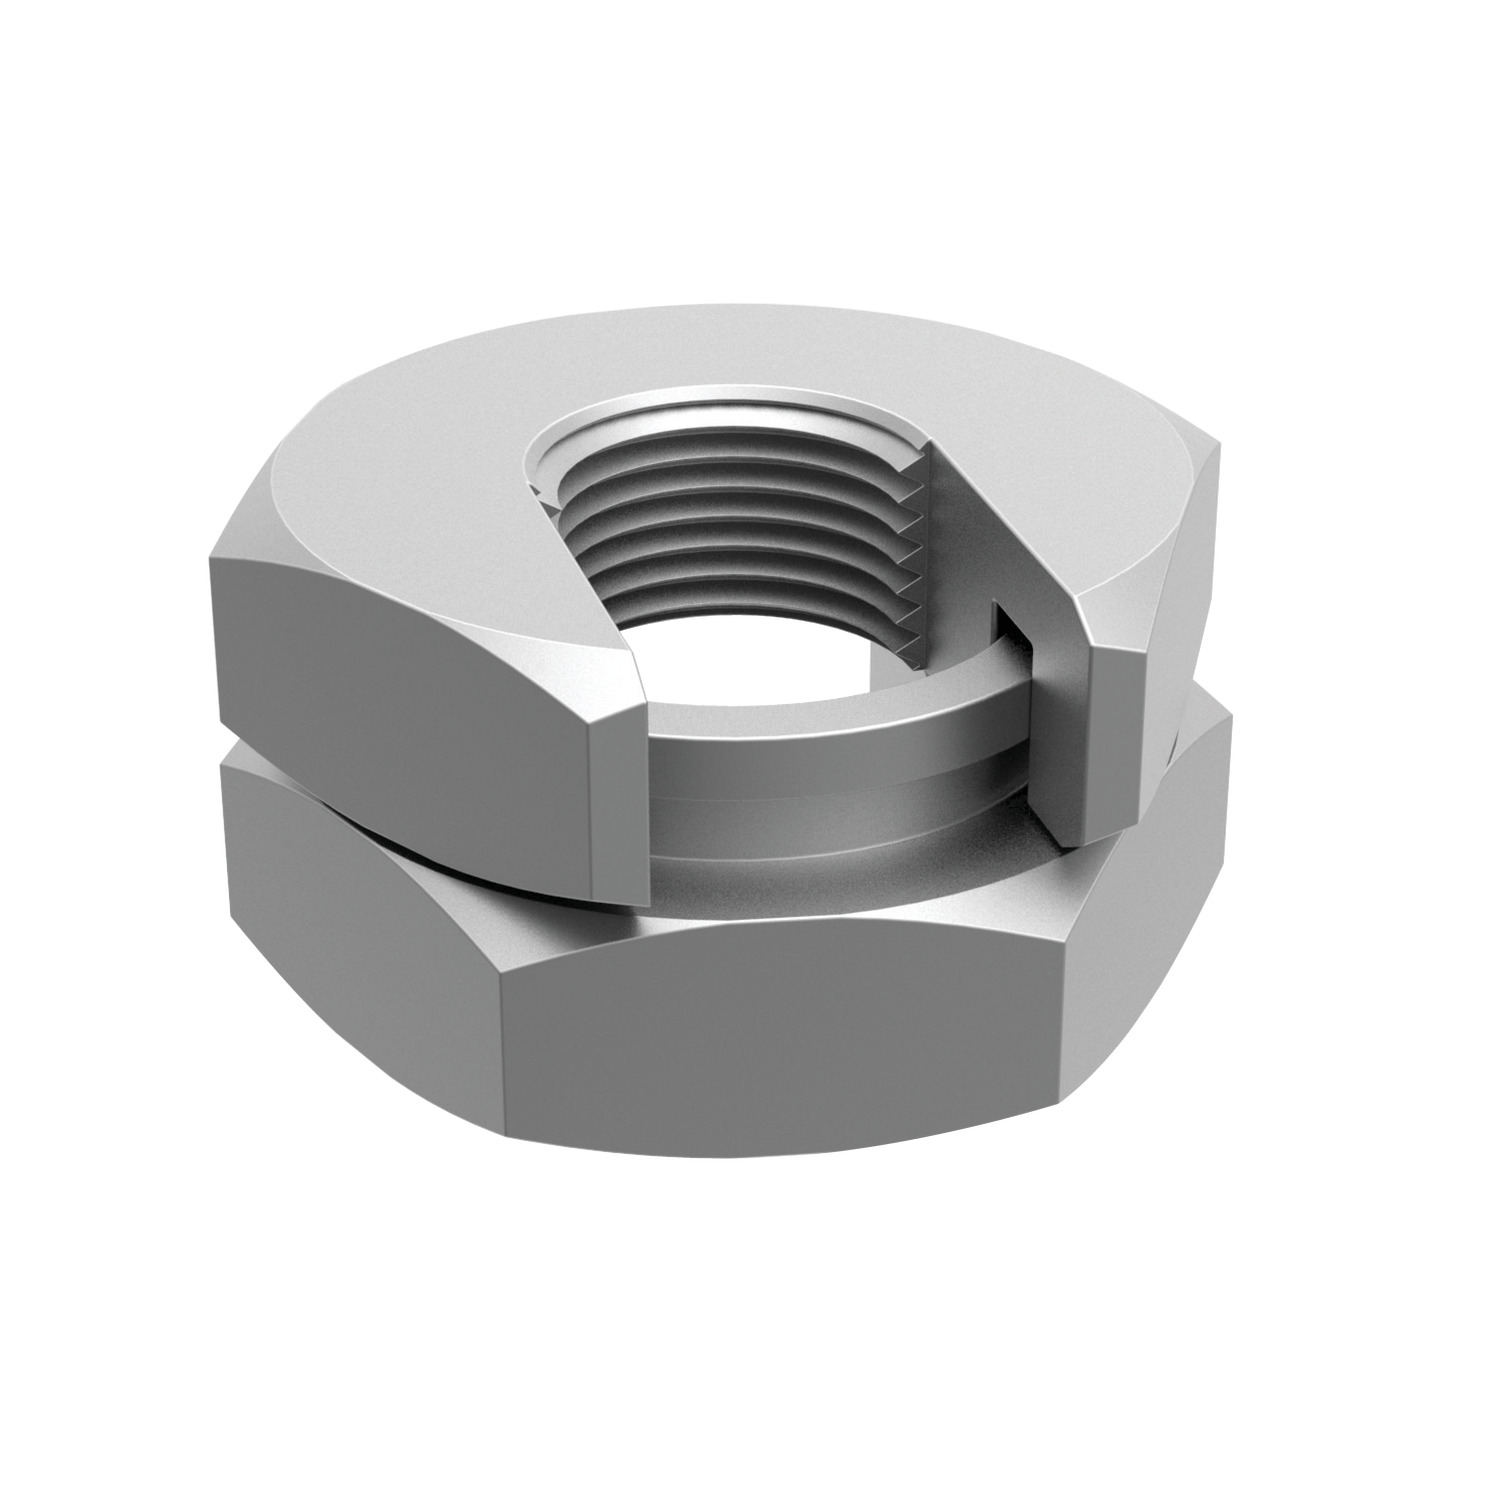 Product 24520, Lock Nuts - Slip-On rapid assembly nut / 